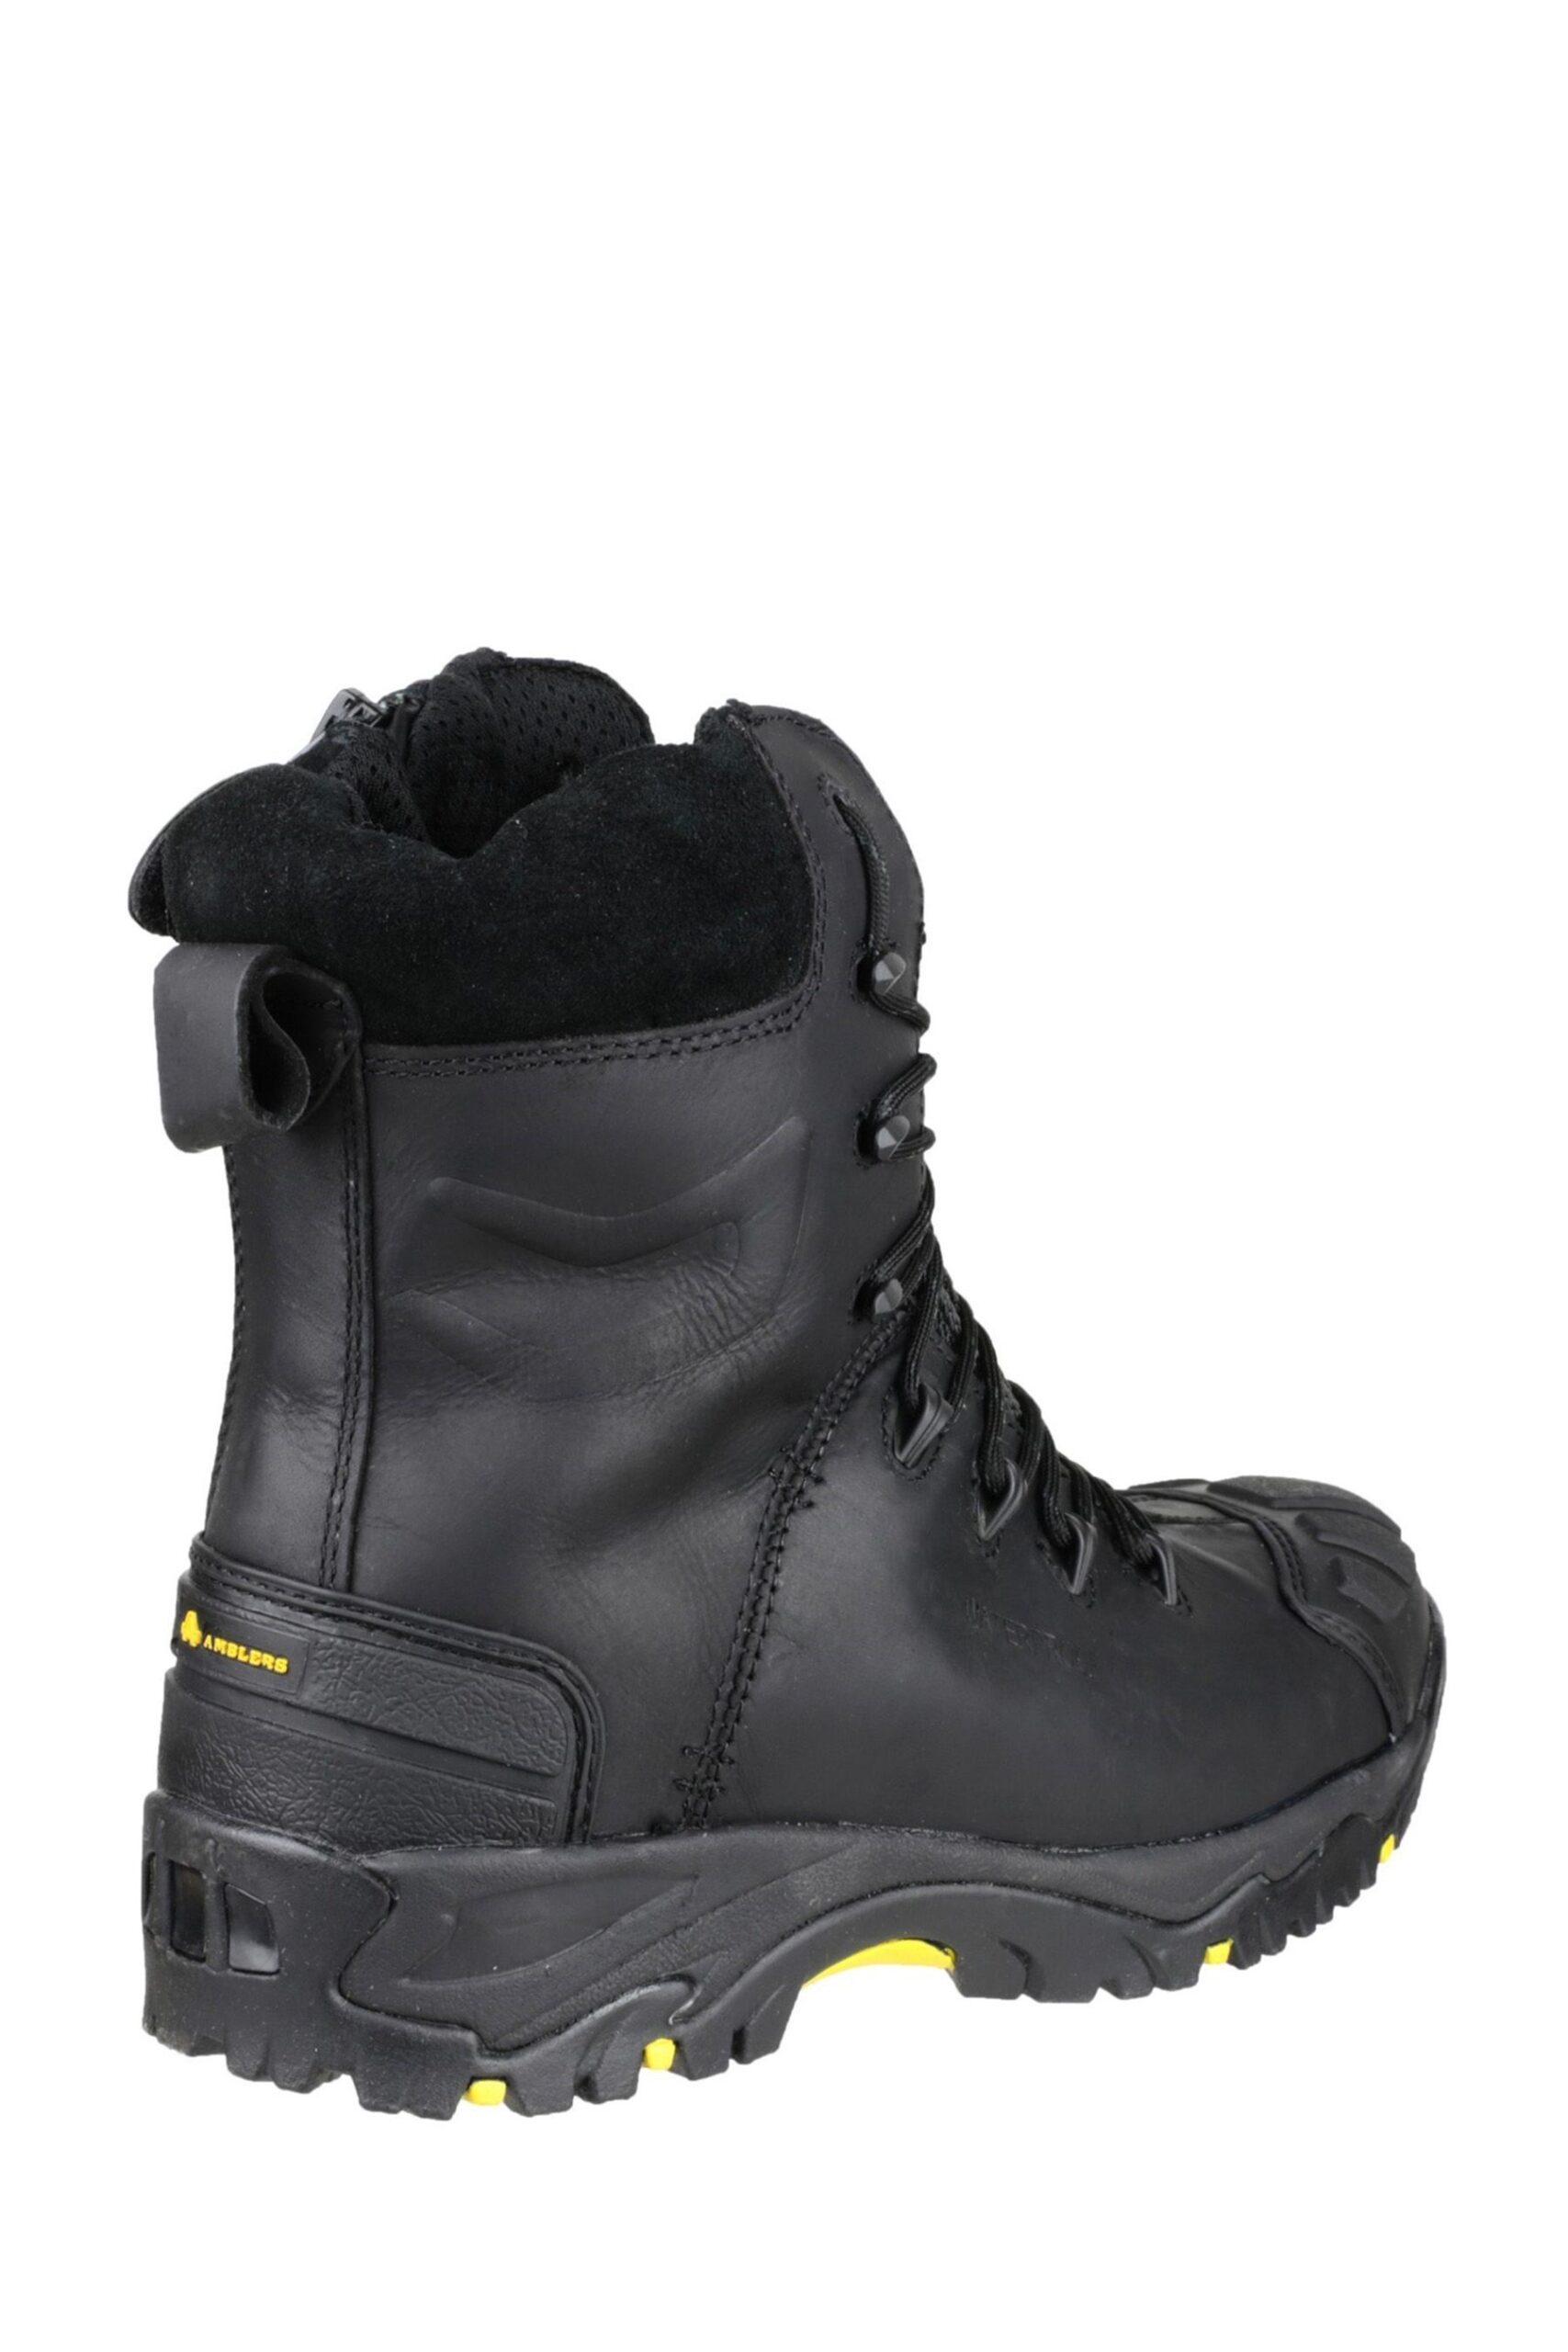 Thinsulate Boots For Excellent Feet
Warmth And Functionality